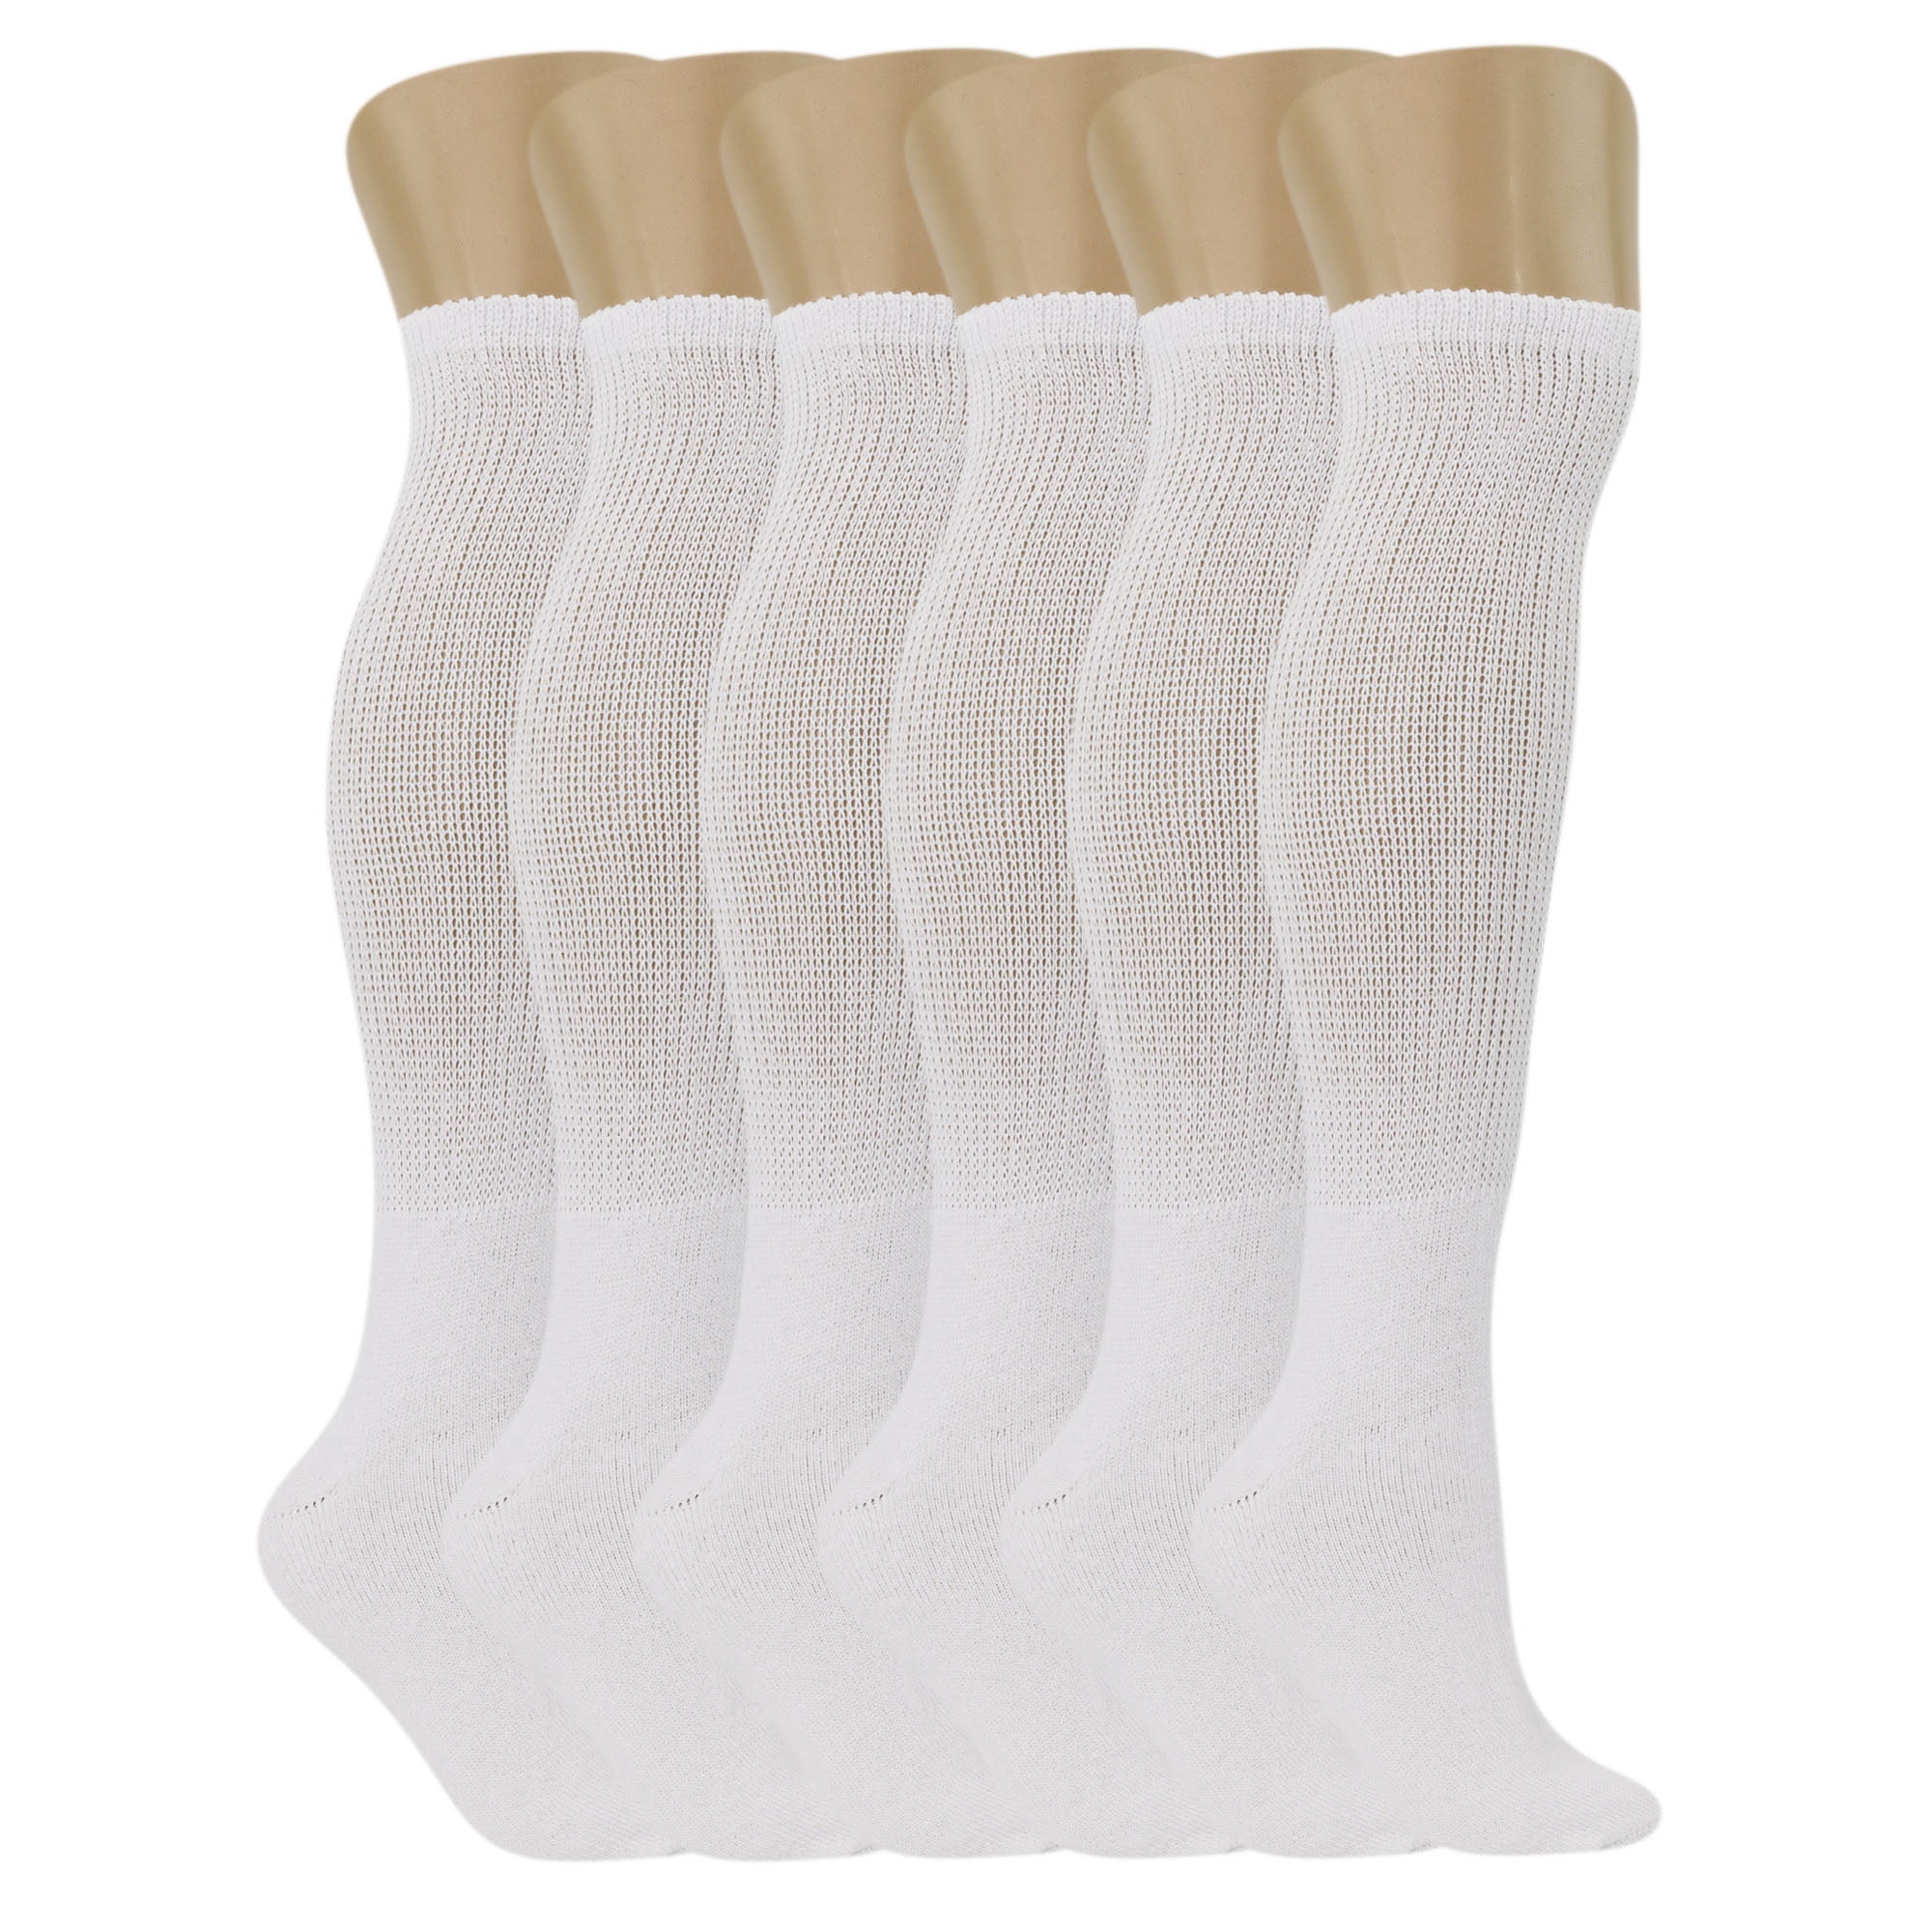 Diabetic Over The Calf Knee Socks for Men and Women 6 Pairs White Size ...